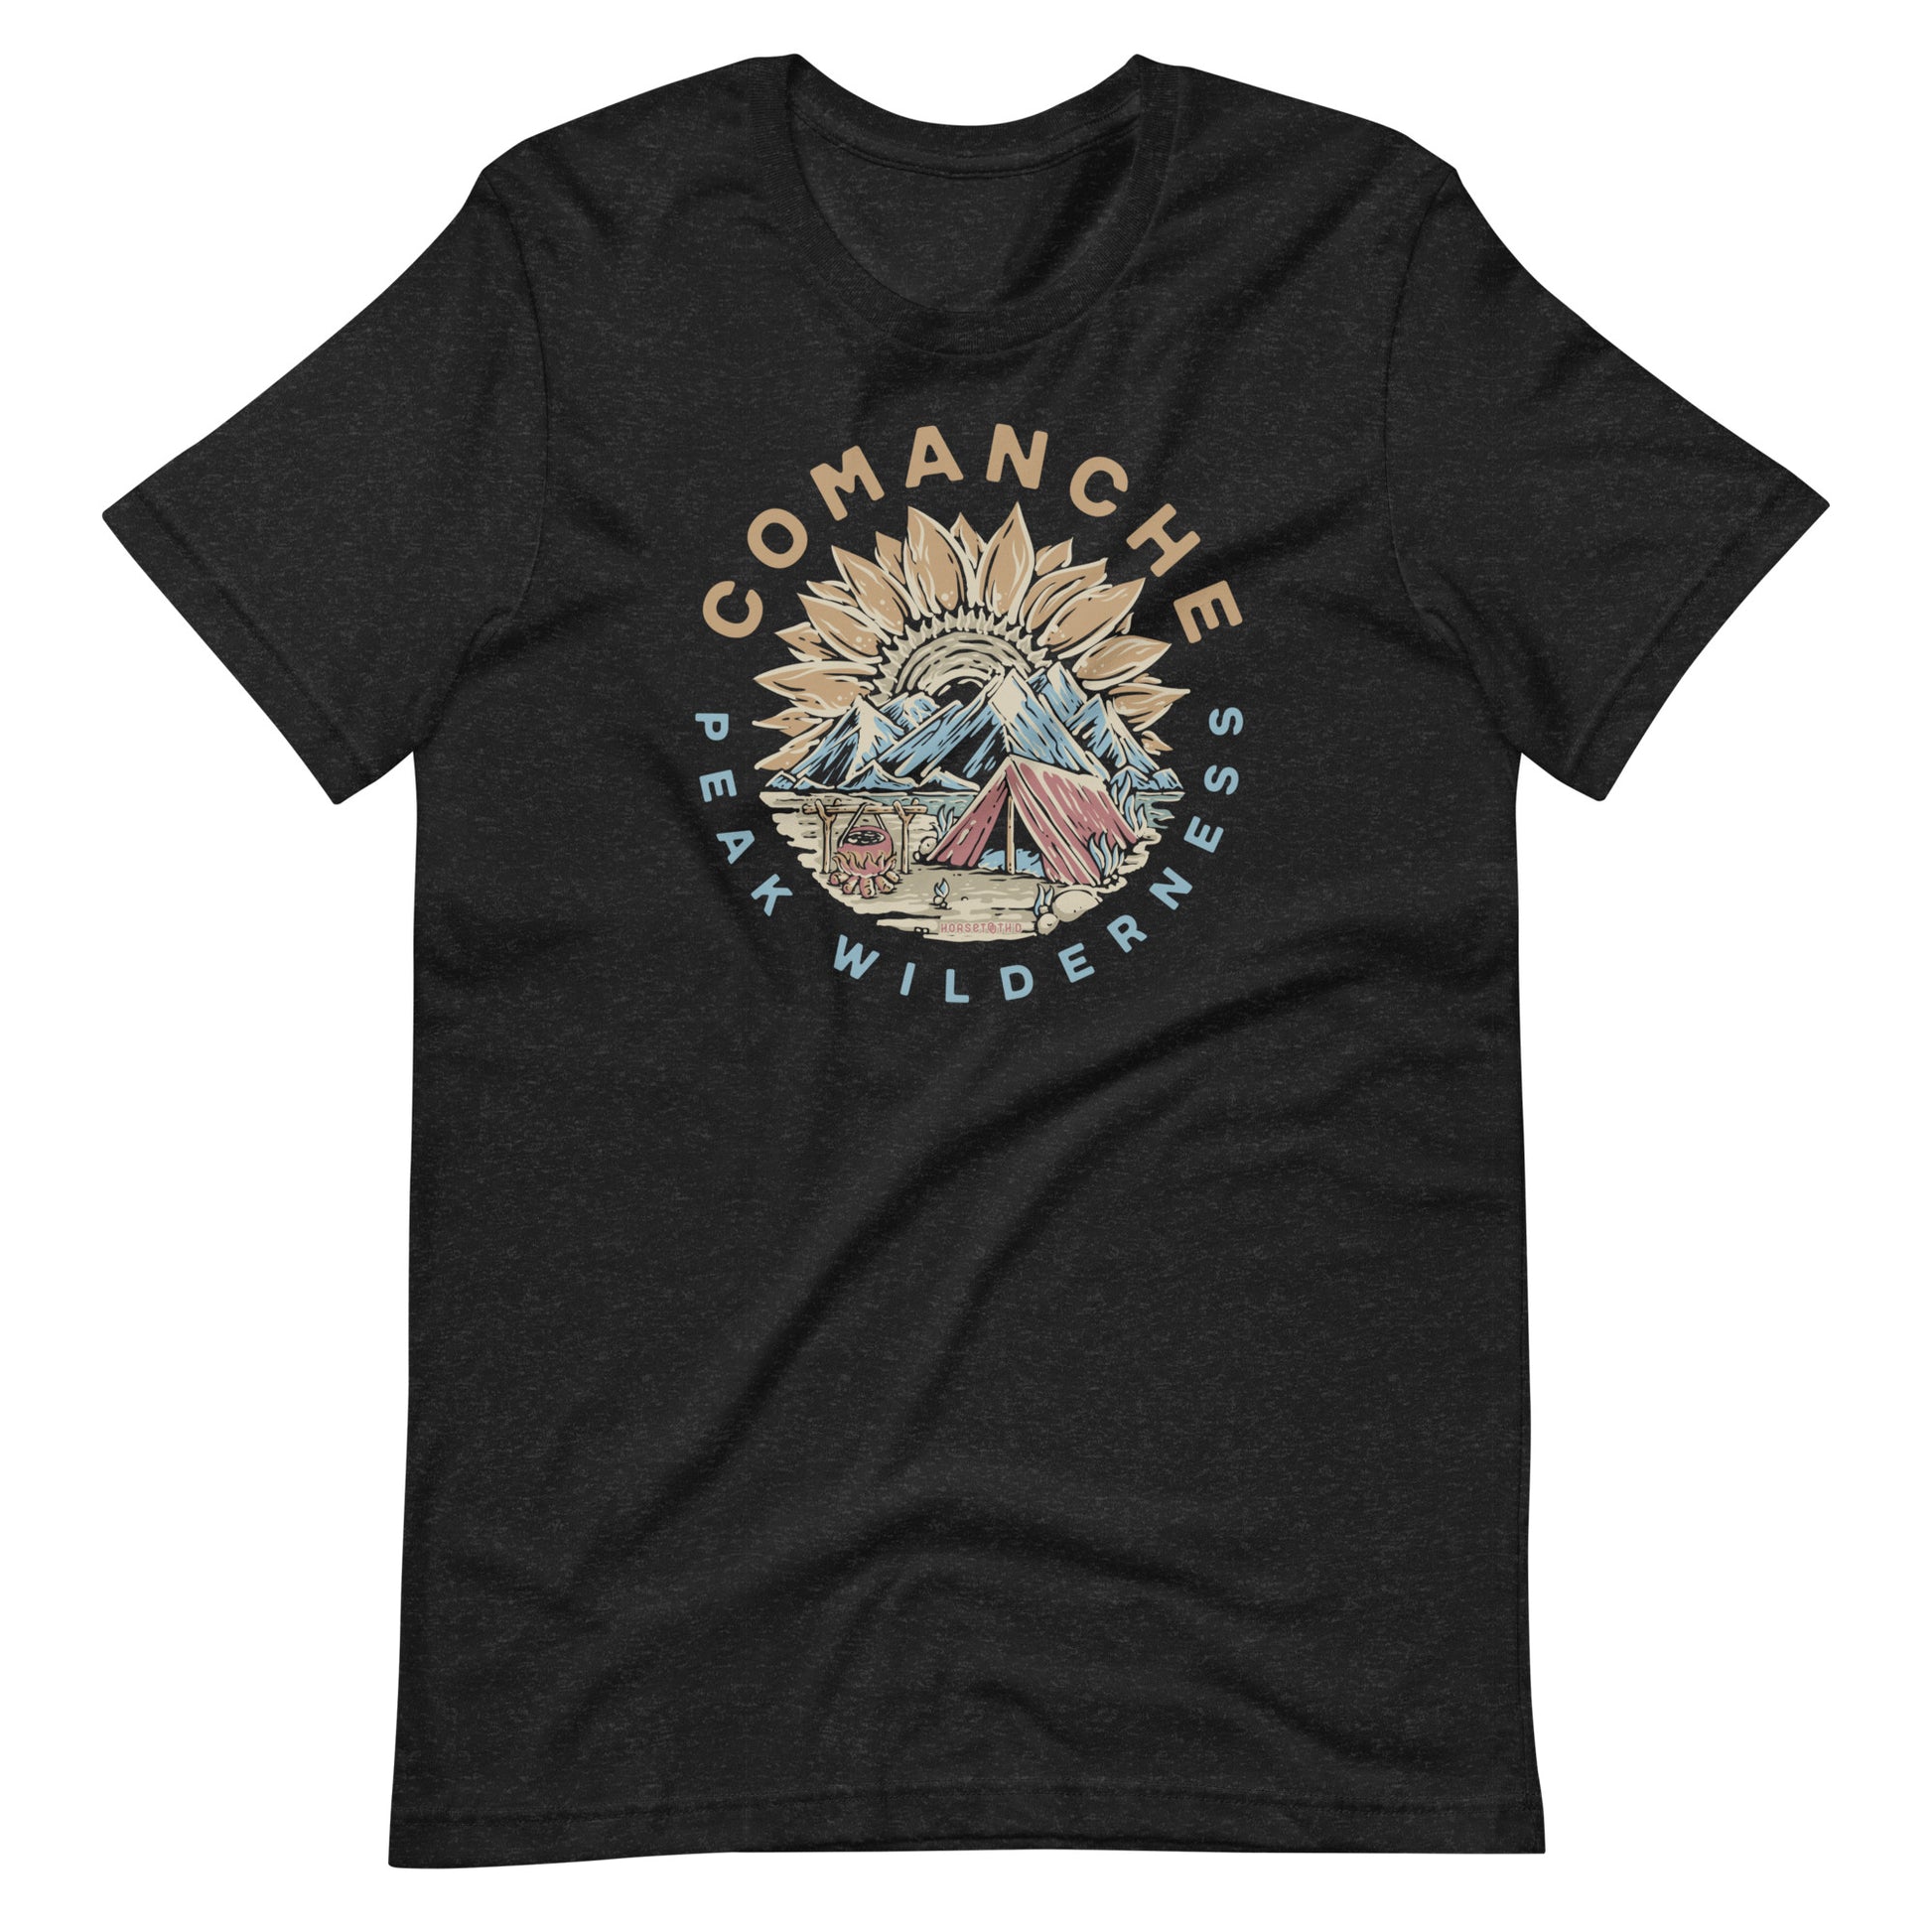 Horsetooth'd branded t-shirt showcasing the natural beauty of Comanche Peak Wilderness, in a comfortable cotton-polyester blend.